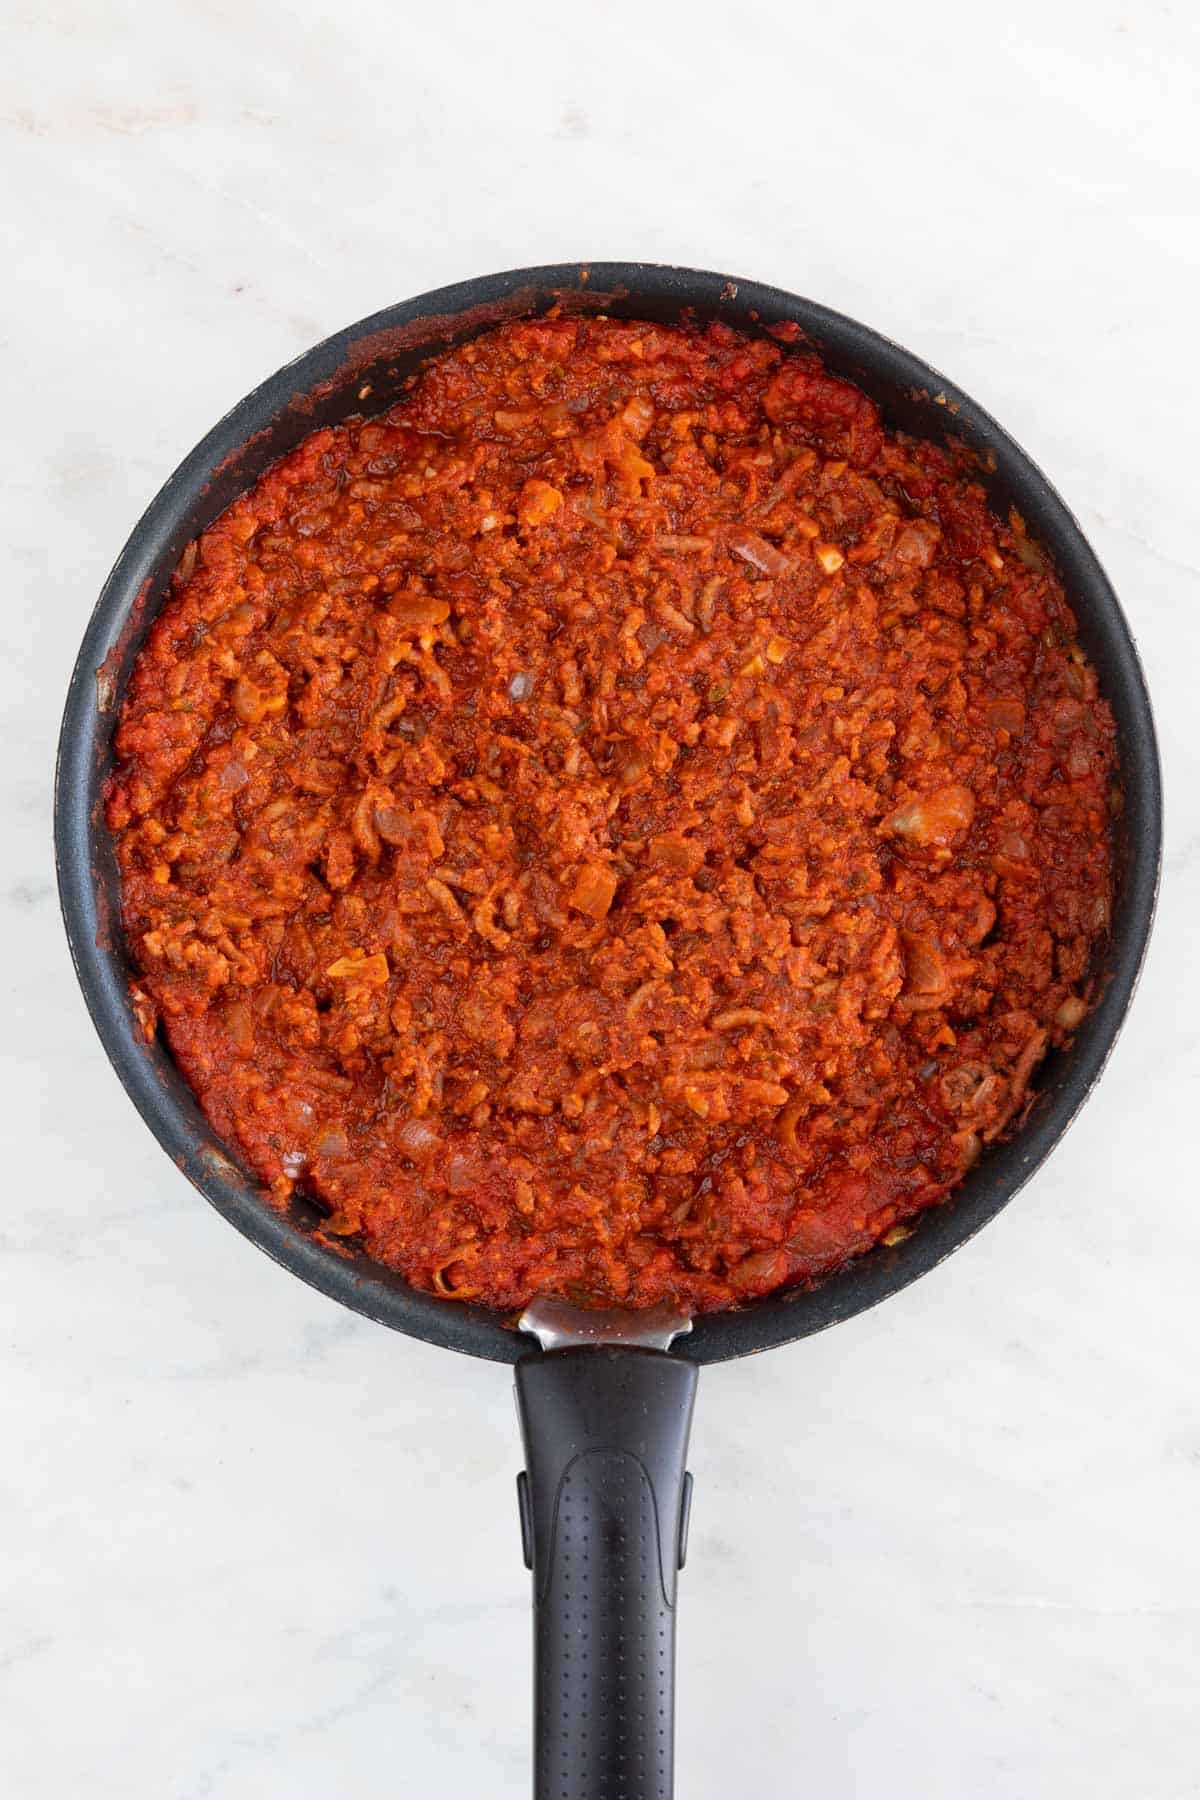 A skillet with the cooked vegan meat sauce.